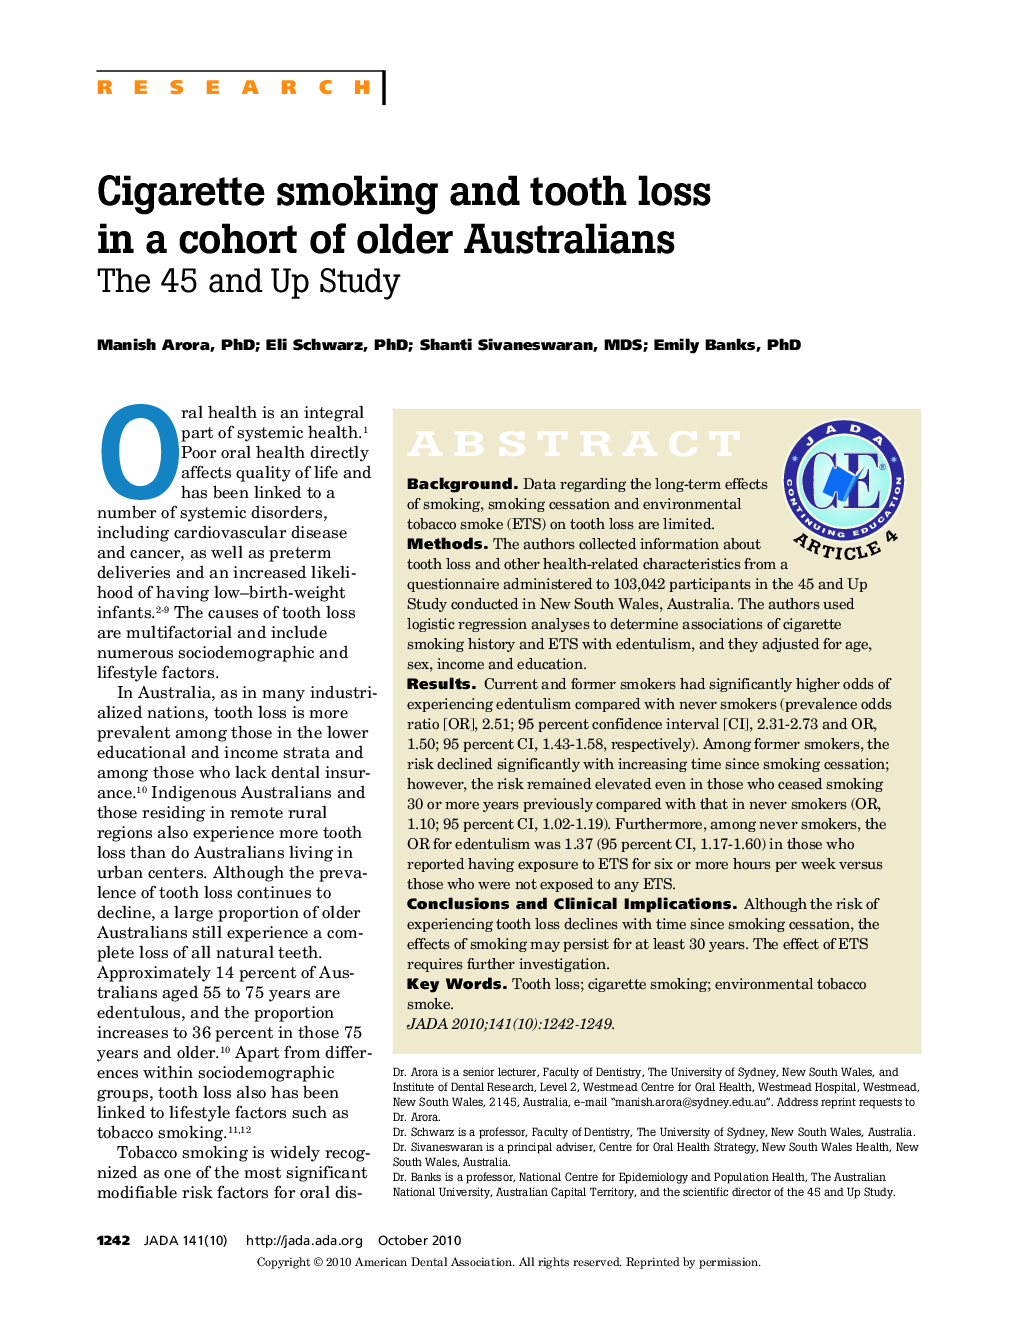 Cigarette Smoking and Tooth Loss in a Cohort of Older Australians